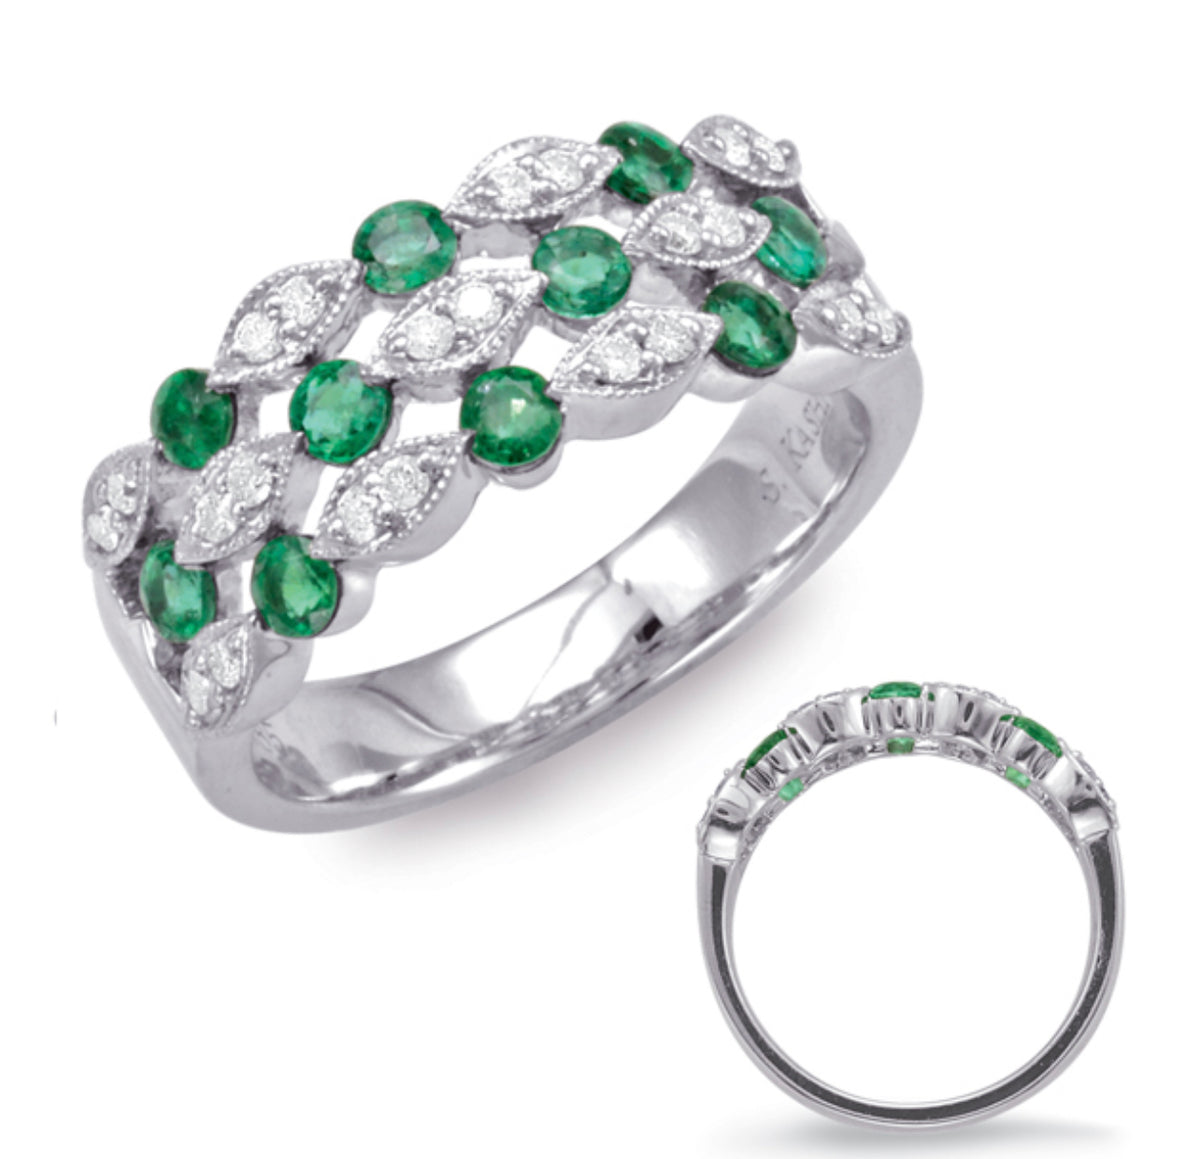 14K White Gold 0.53cttw Emeralds and 0.20cttw Diamond Ring - Size 7